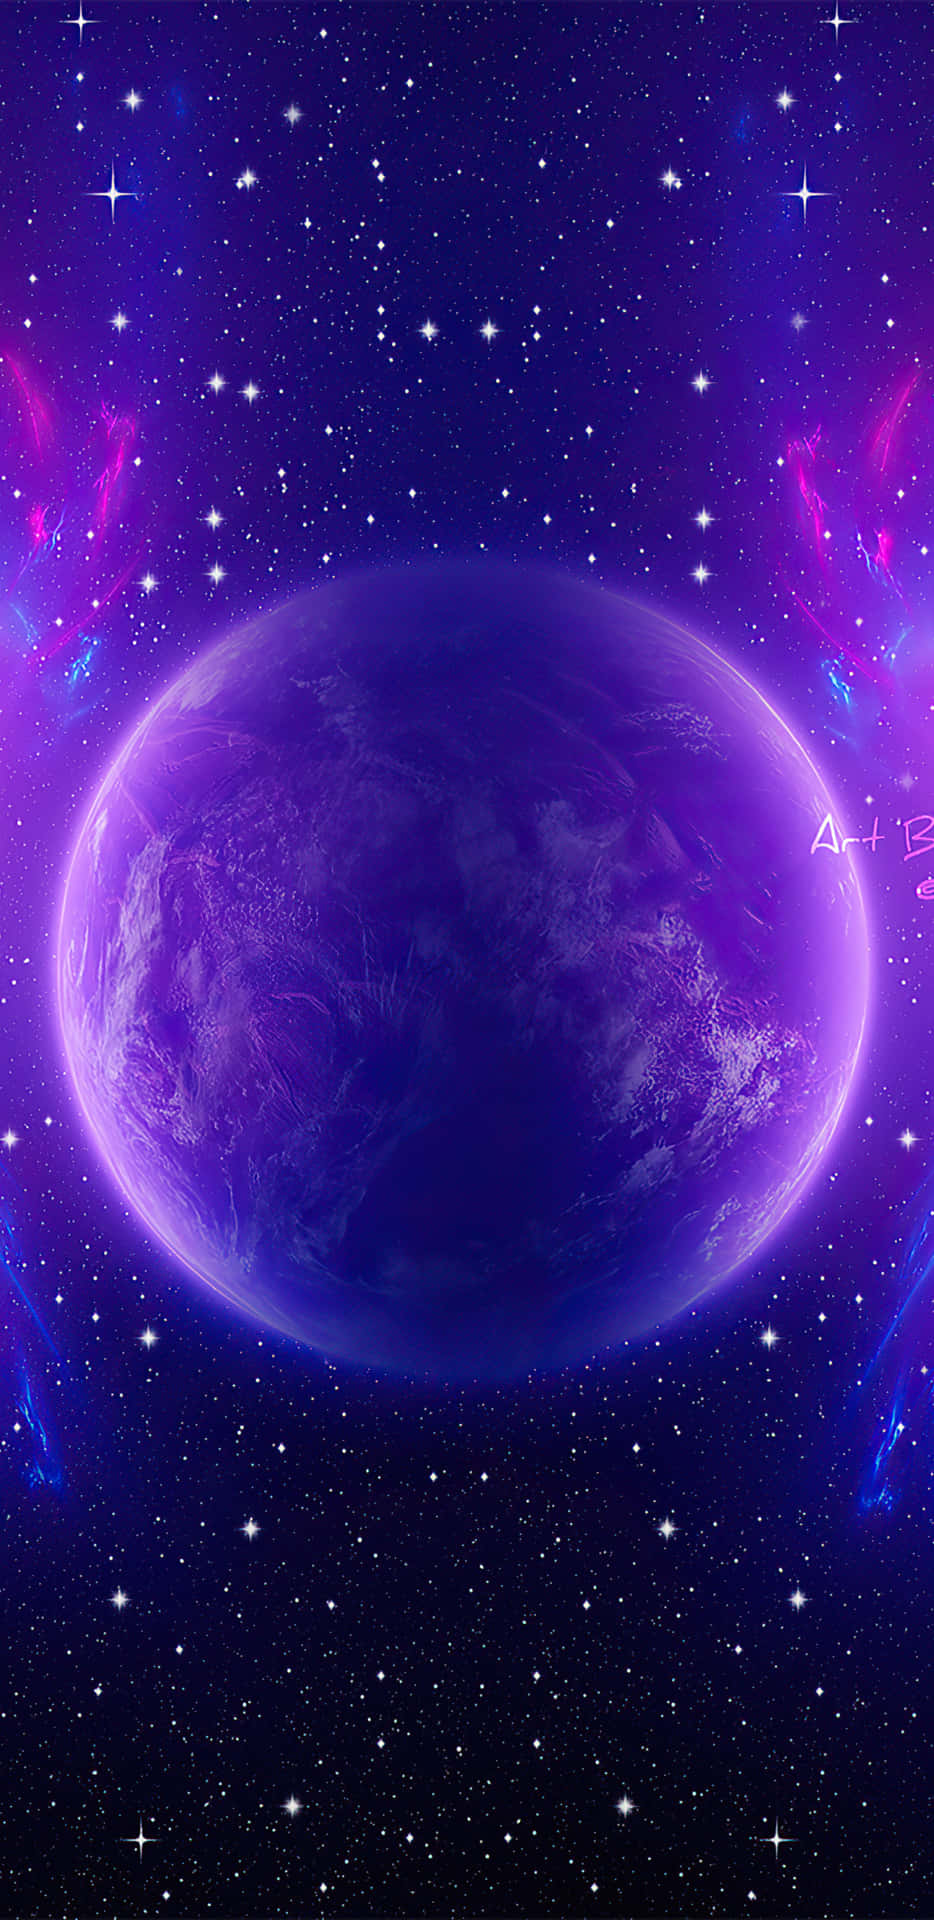 NEW][FREE] Space Live Wallpapers | Android Forums